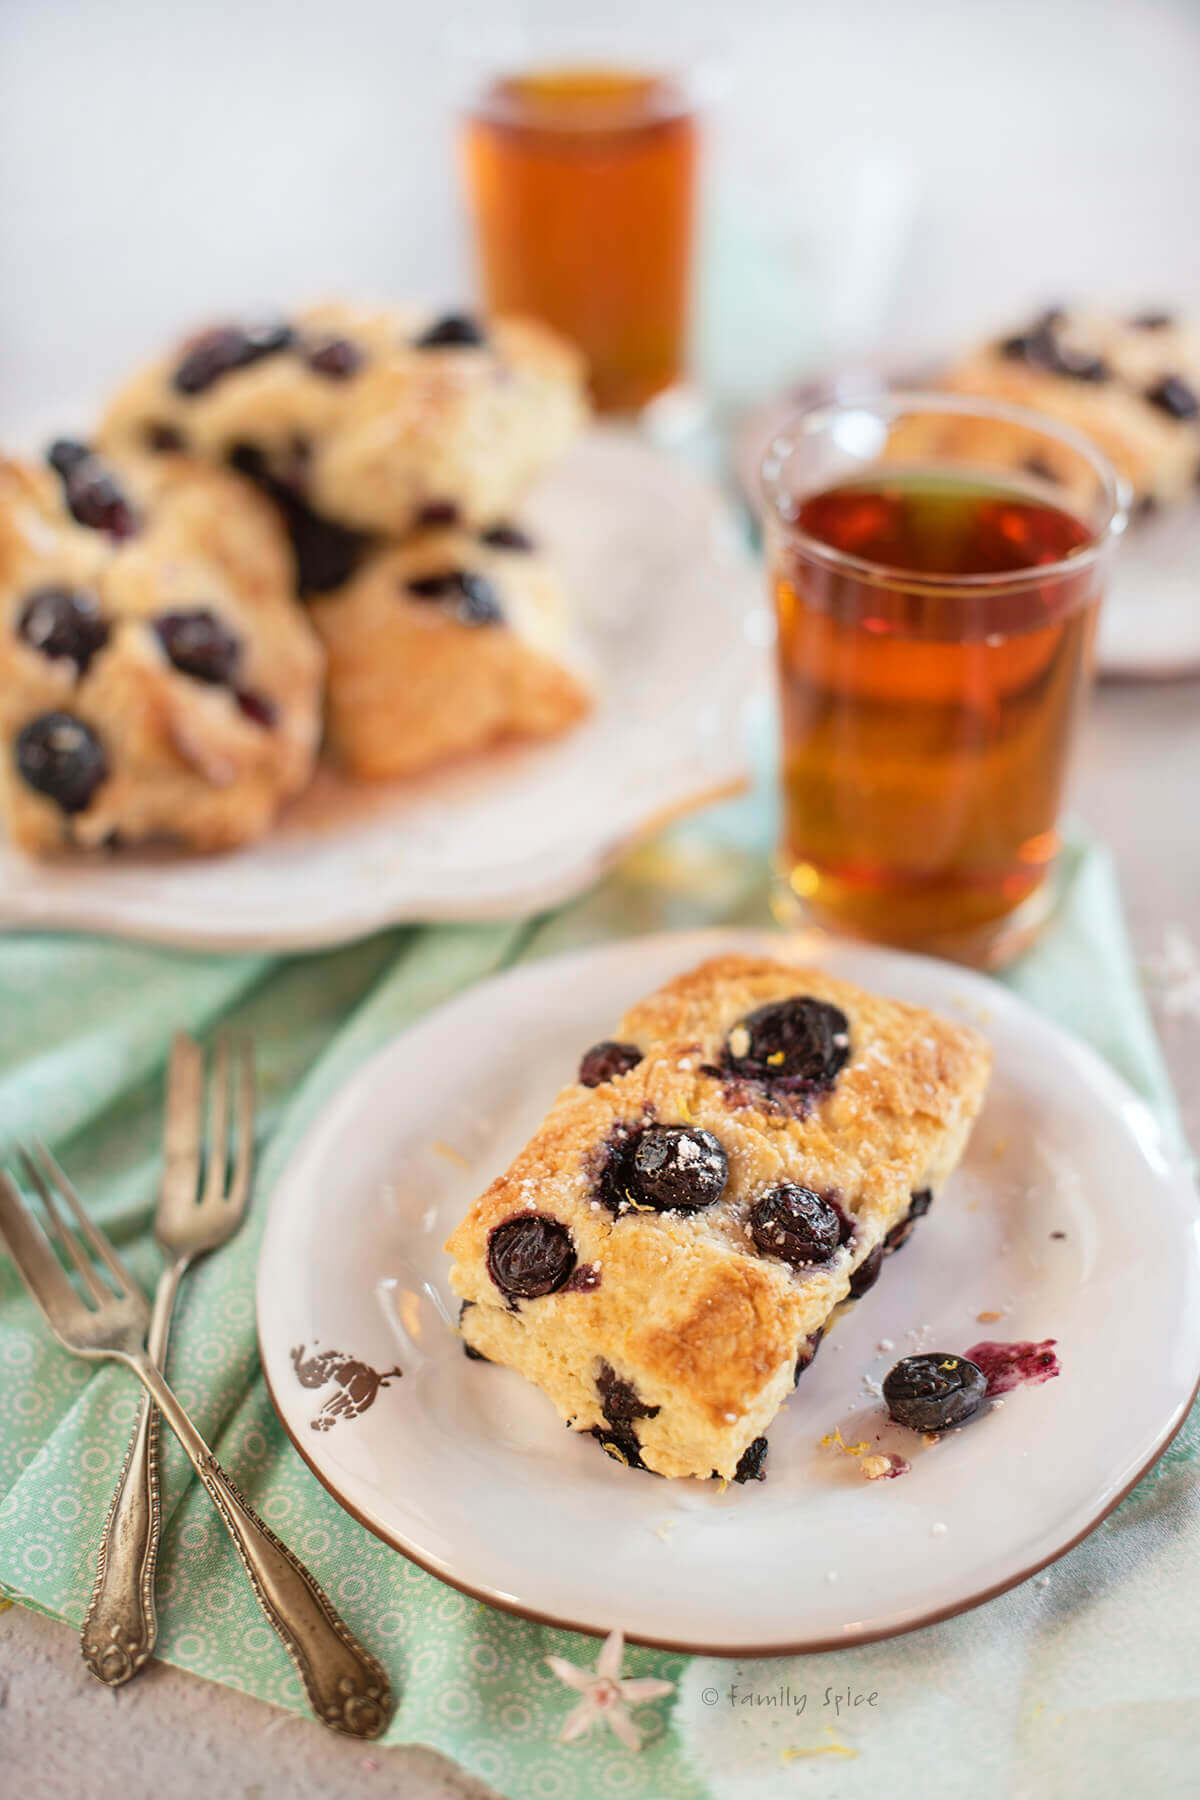 Closeup of a blueberry sour cream scone on a white plate with tea and more scones behind it